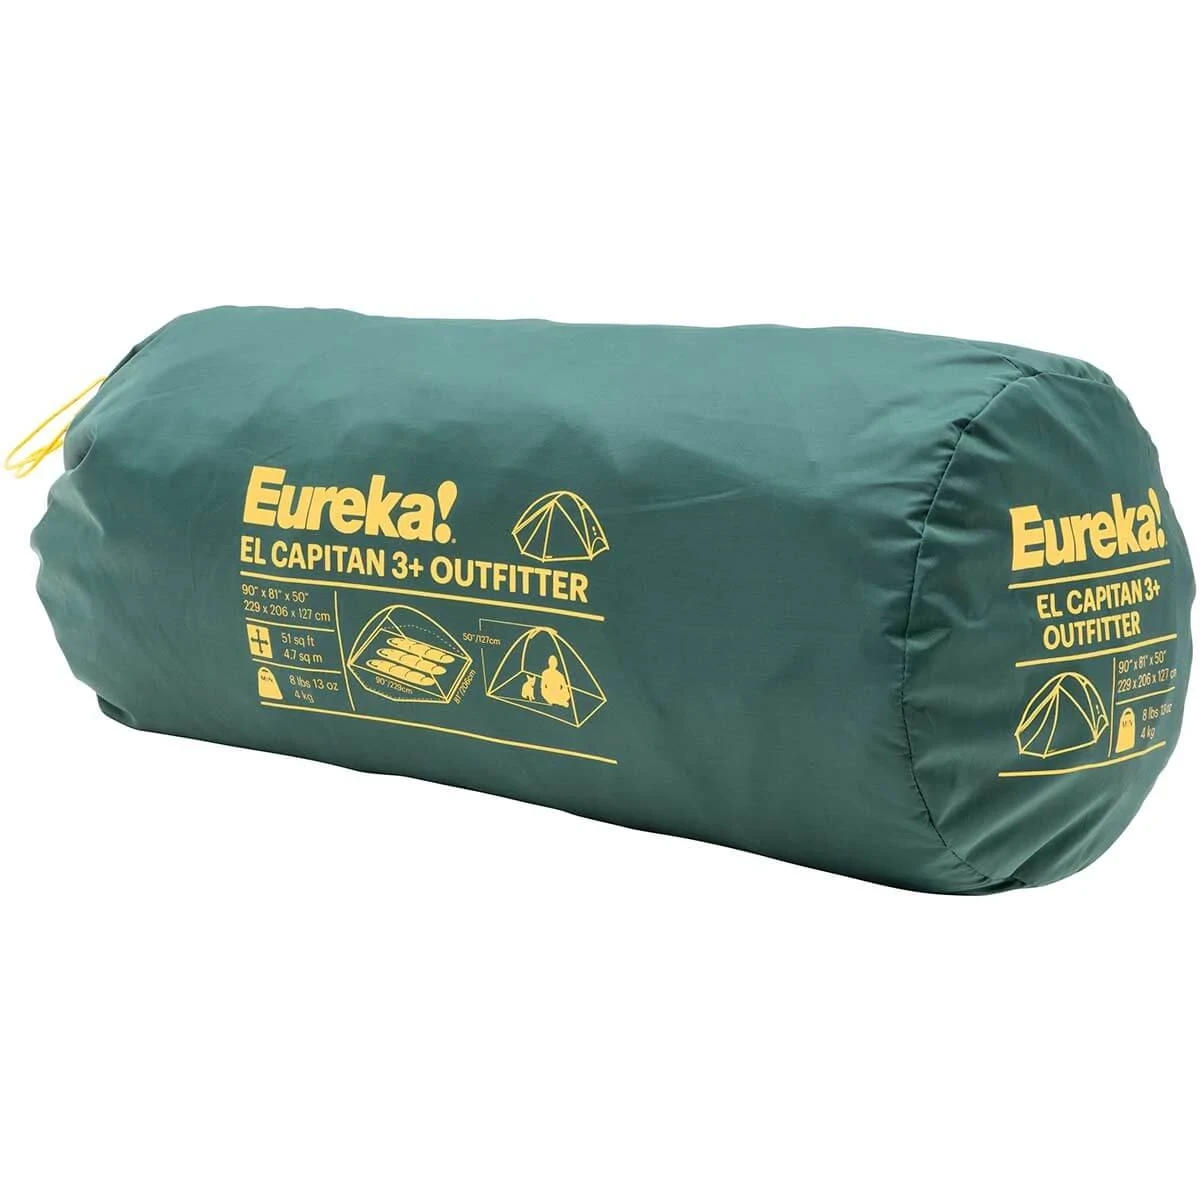 Packed Eureka! El Capitan 3+ Outfitter Tent in carry bag